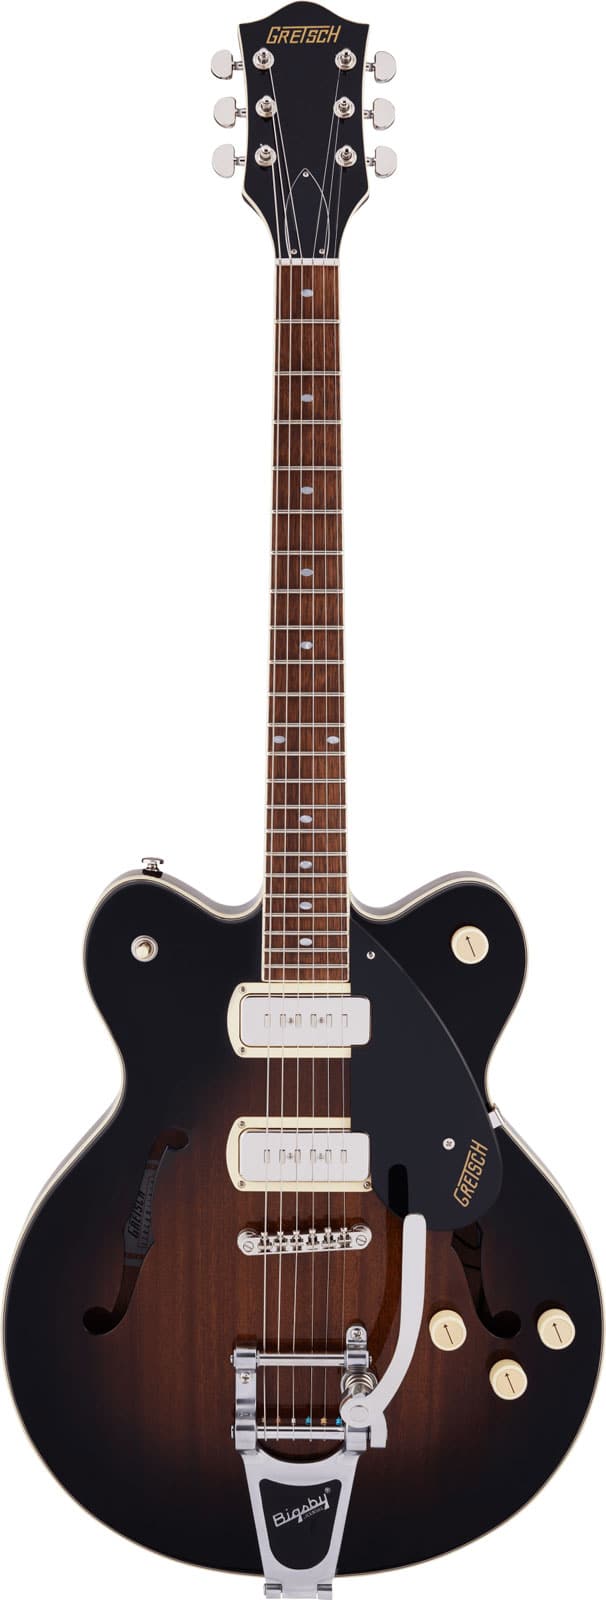 GRETSCH GUITARS G2622T-P90 STREAMLINER CENTER BLOCK DOUBLE-CUT P90 WITH BIGSBY LRL, BROWNSTONE